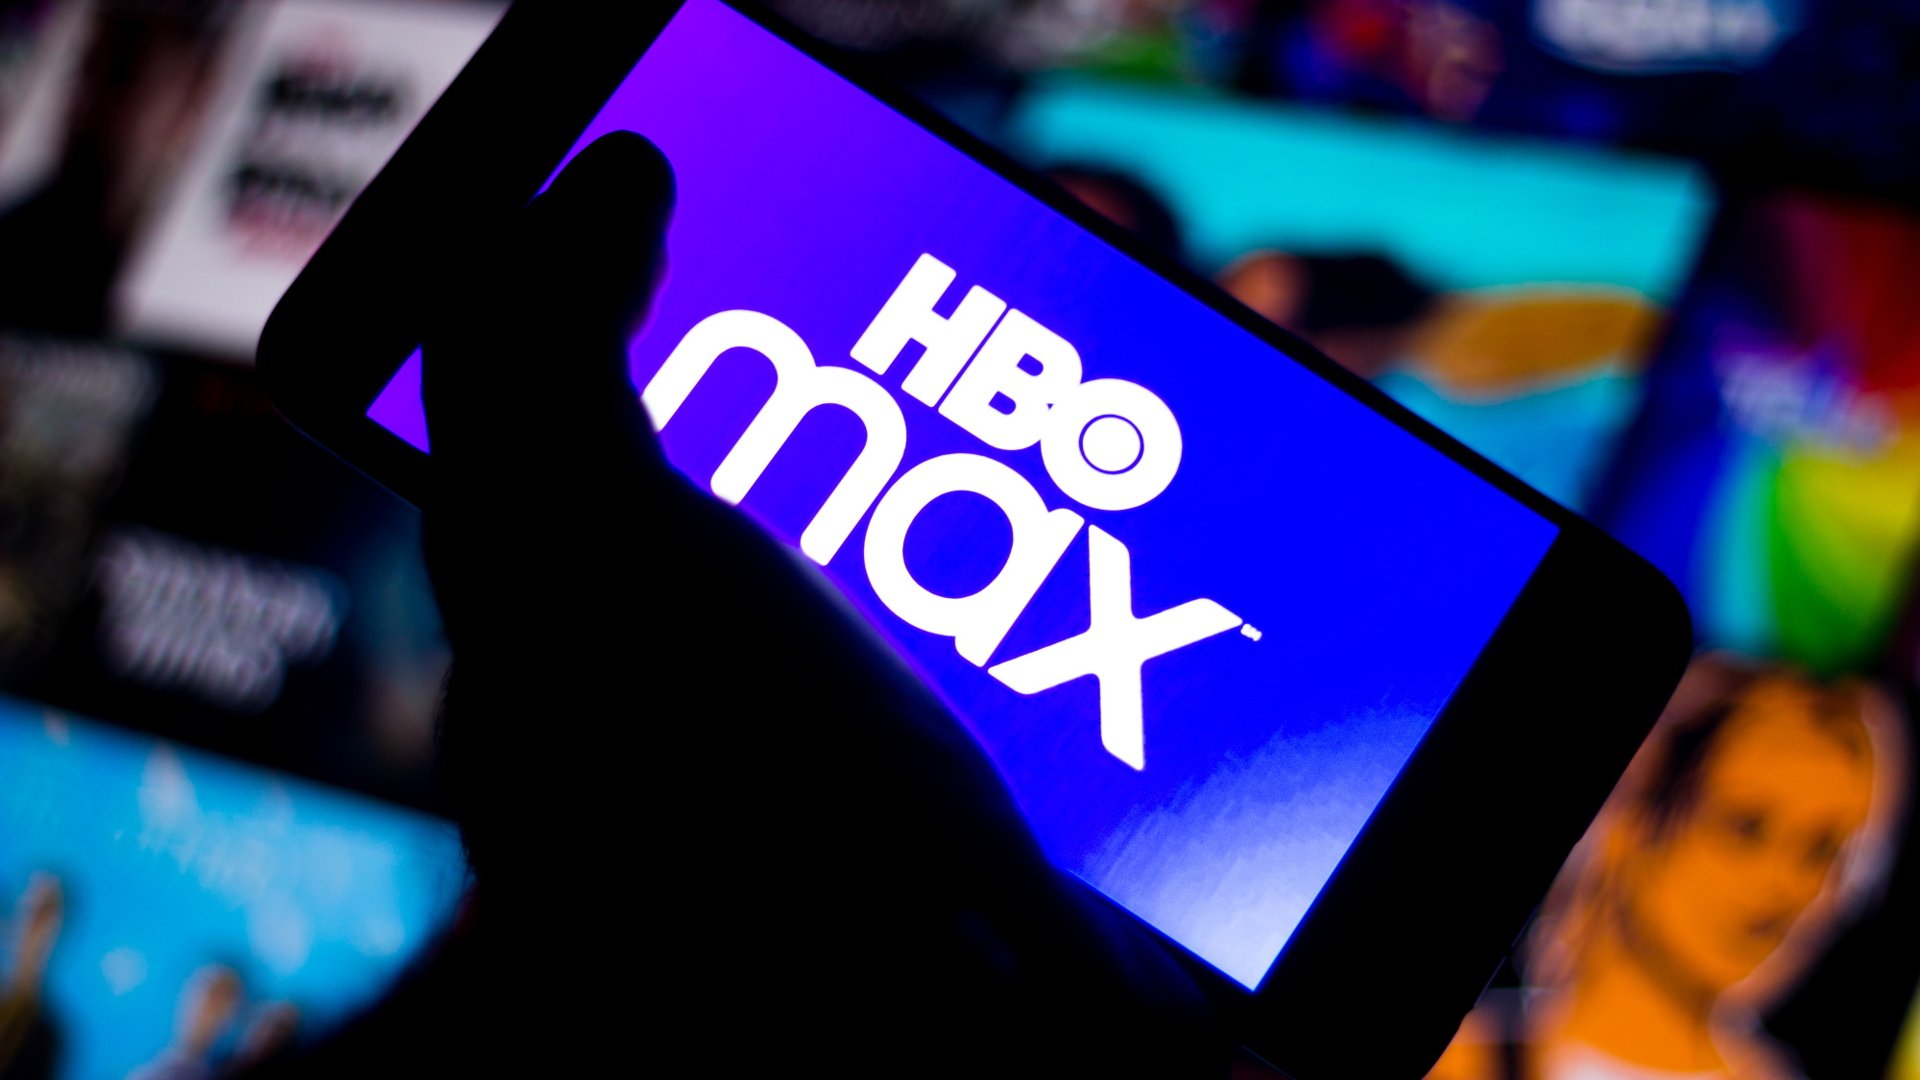 HBO Max logo on smartphone